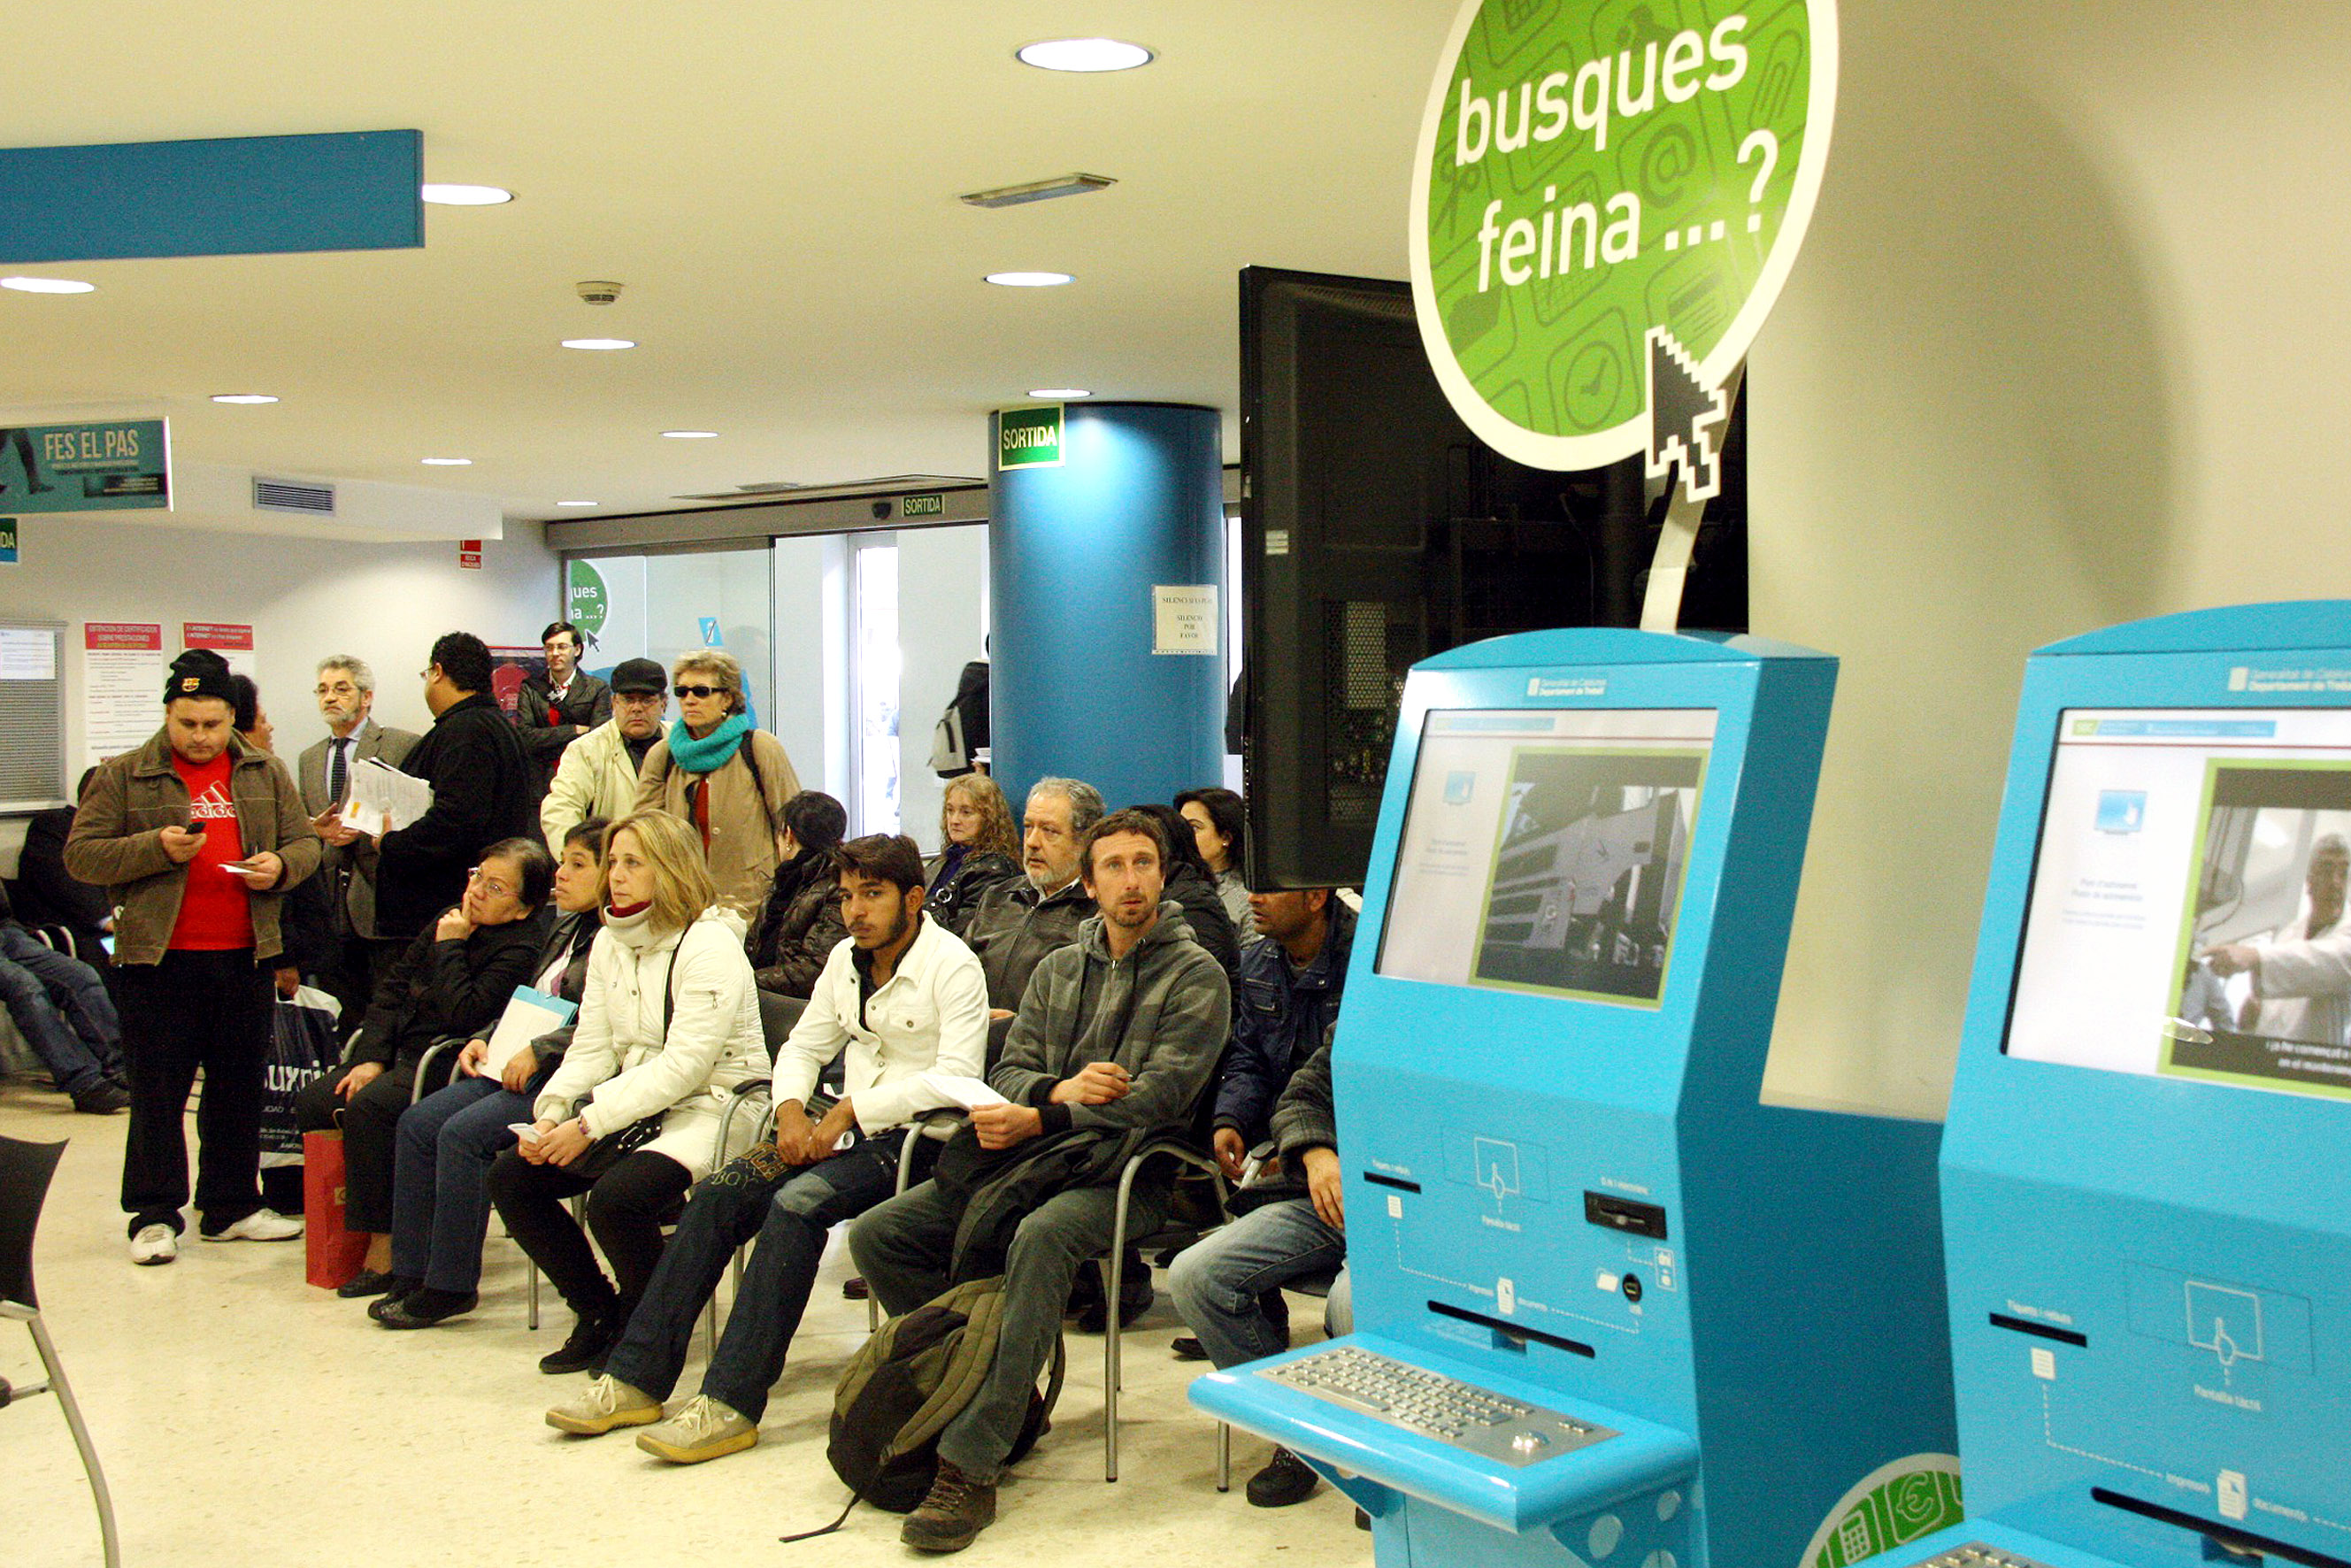 Image of a job centre in Catalonia (by ACN)